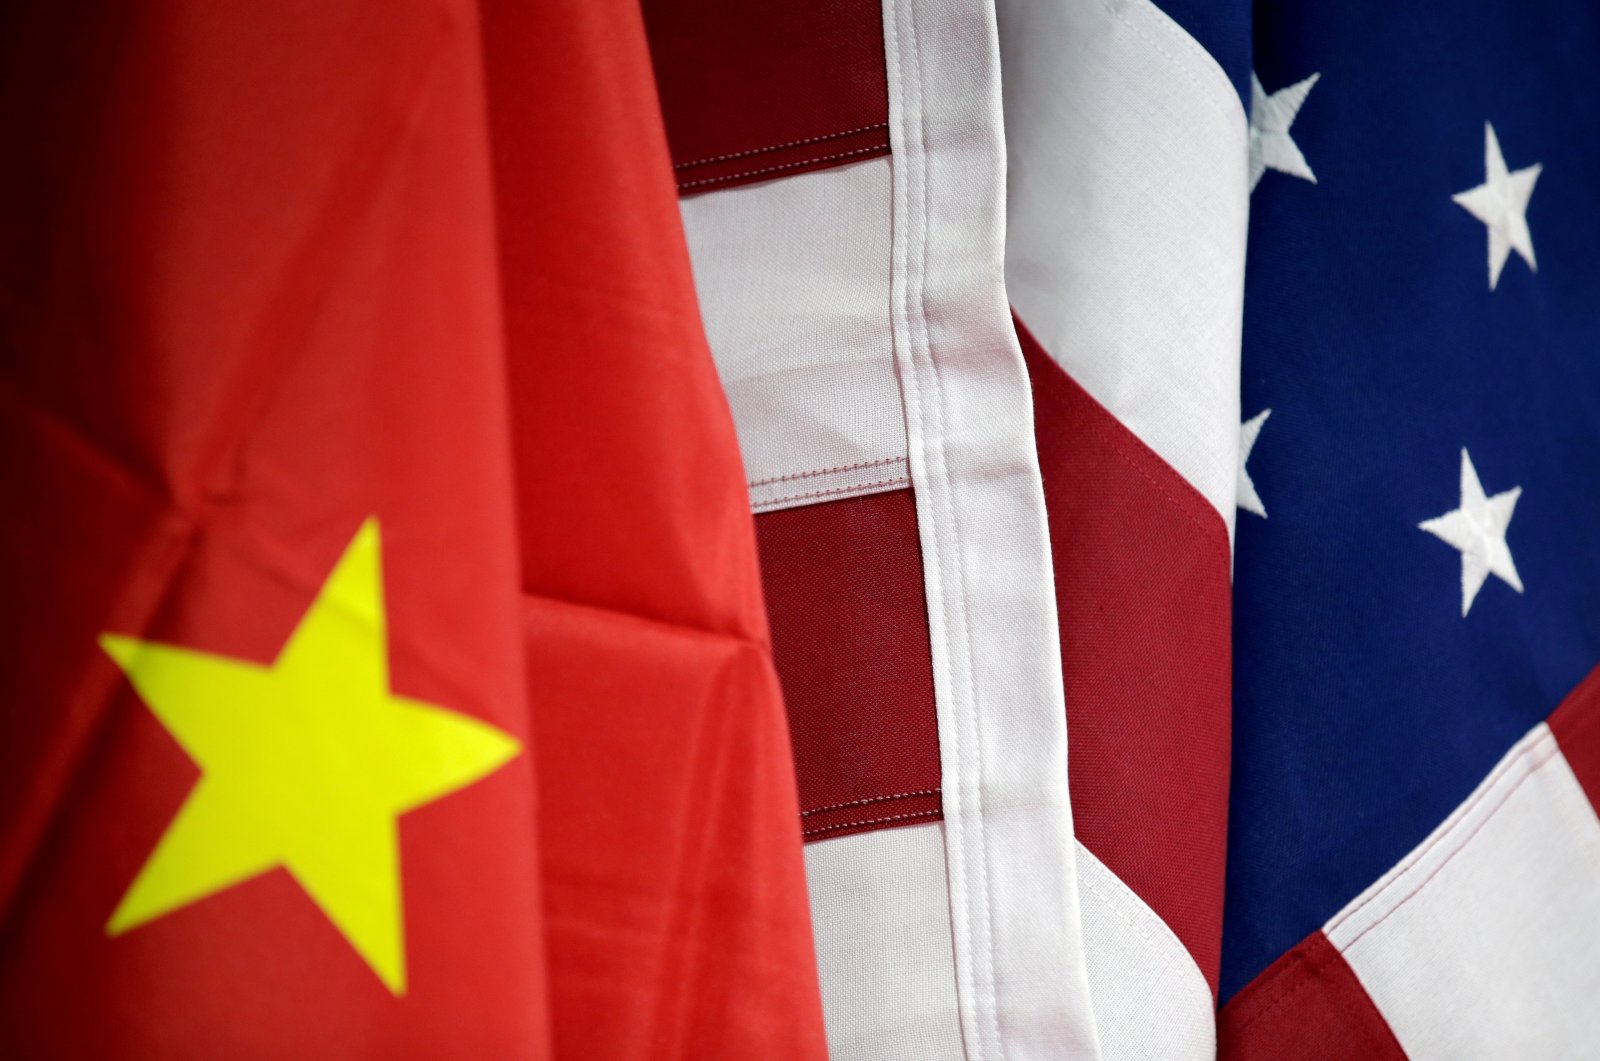 Flags of U.S. and China are displayed at American International Chamber of Commerce (AICC)'s booth during China International Fair for Trade in Services in Beijing, China, May 28, 2019. (Reuters Photo)